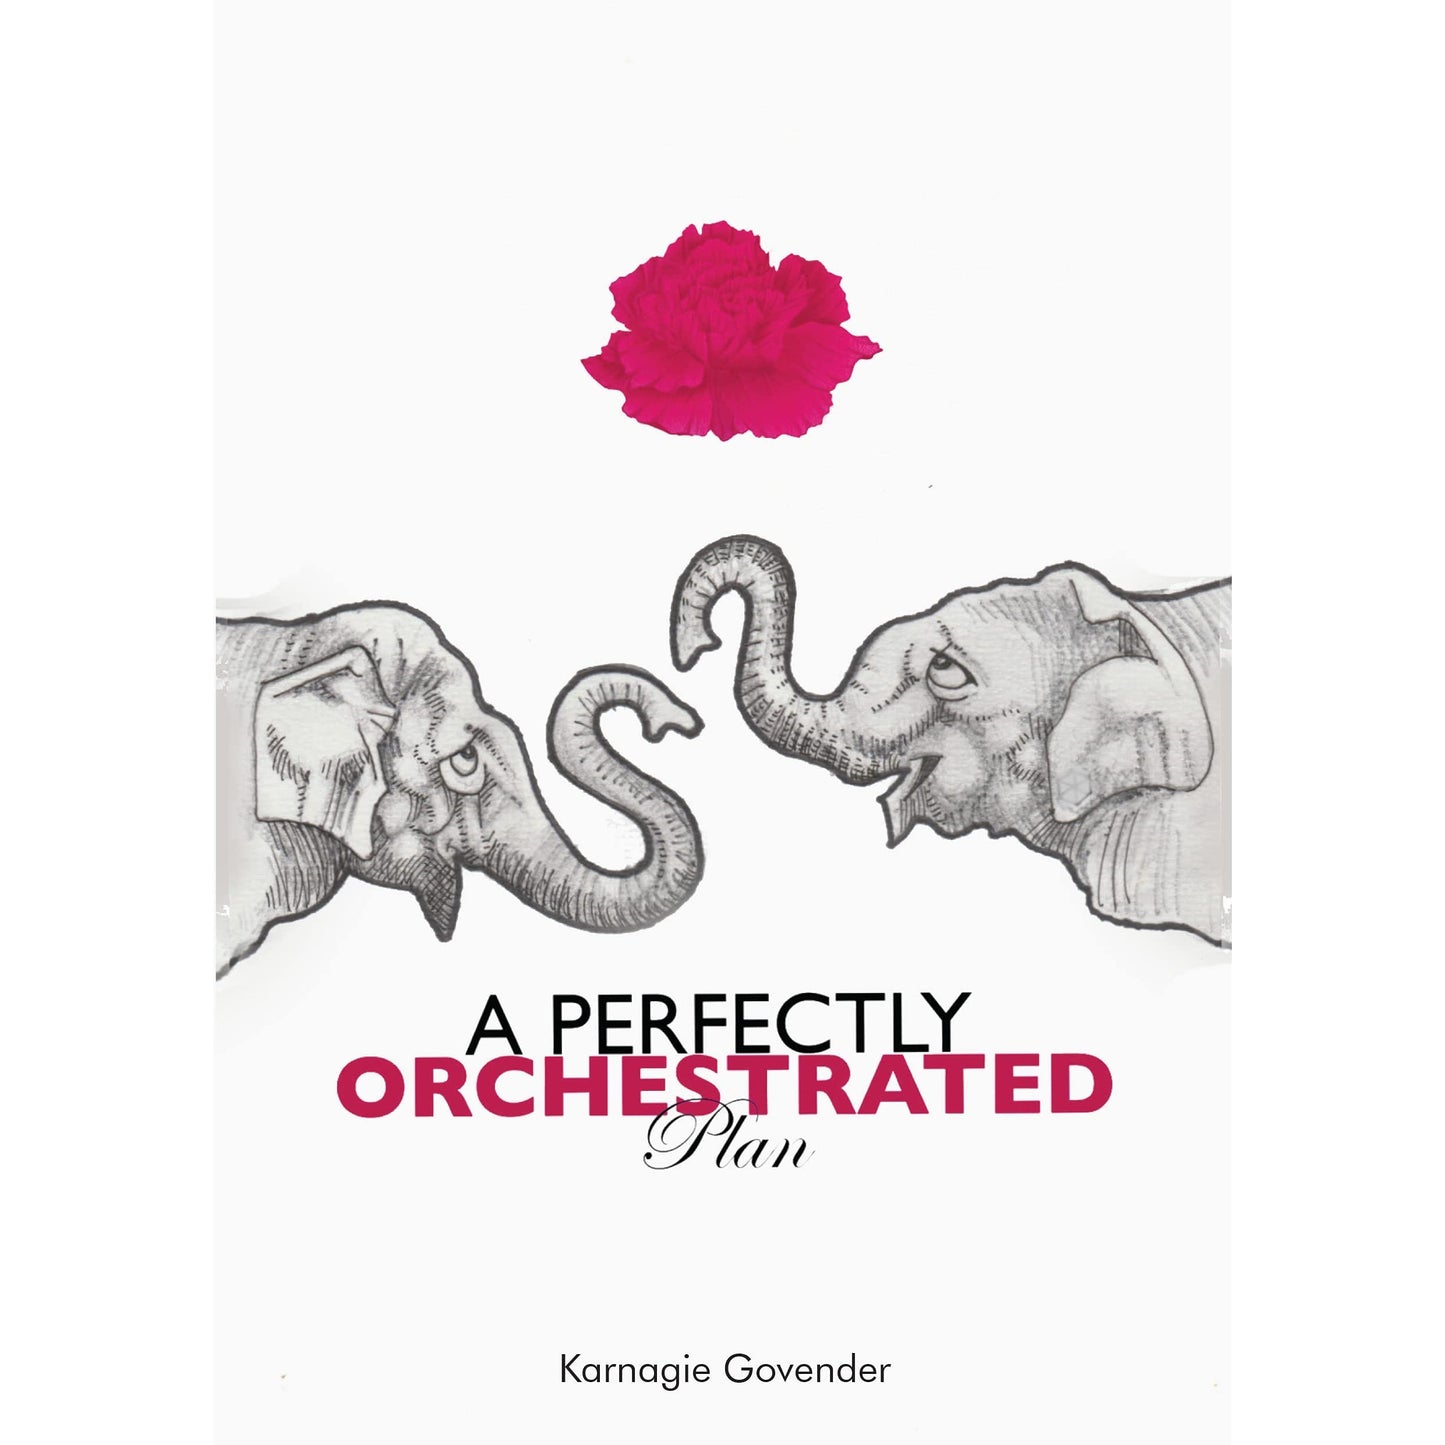 A perfectly orchestrated plan, by Karnagie Govender